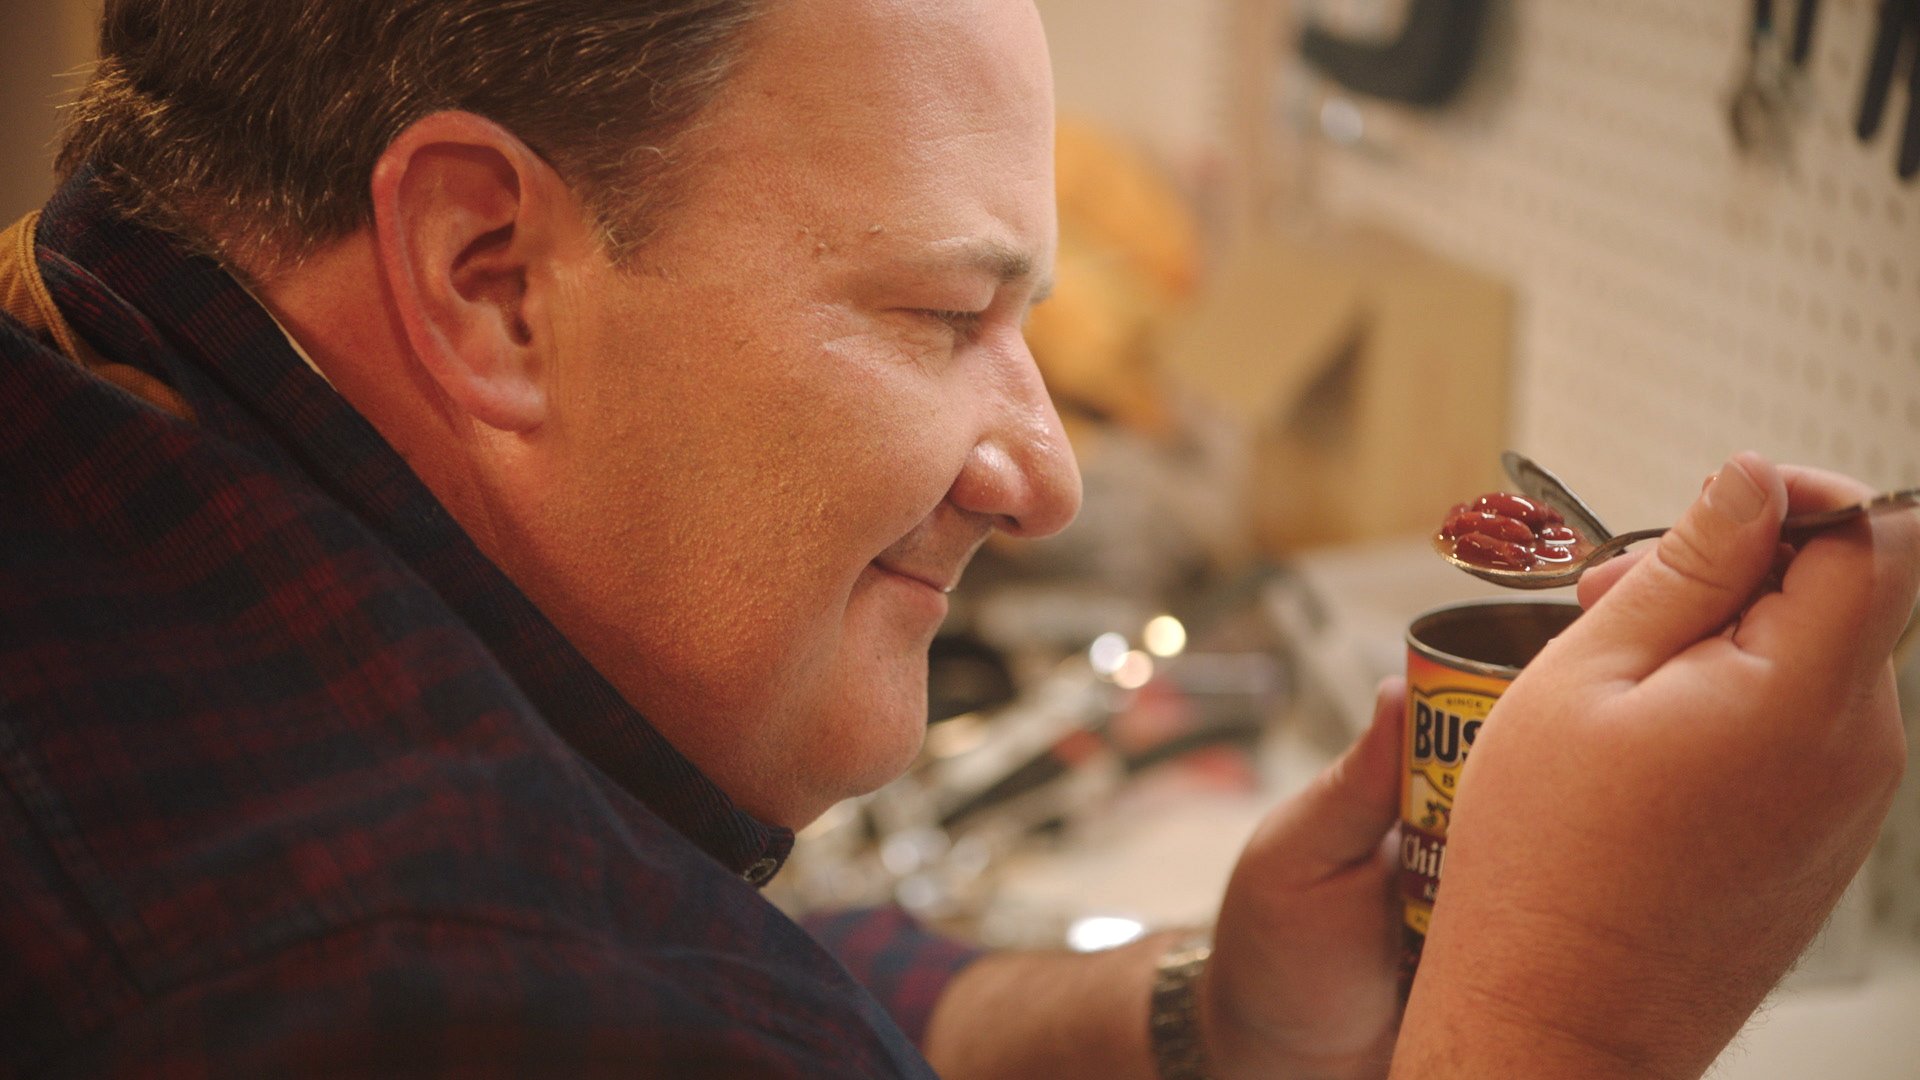 'The Office' actor Brian Baumgartner holding a can of Bush's chili beans